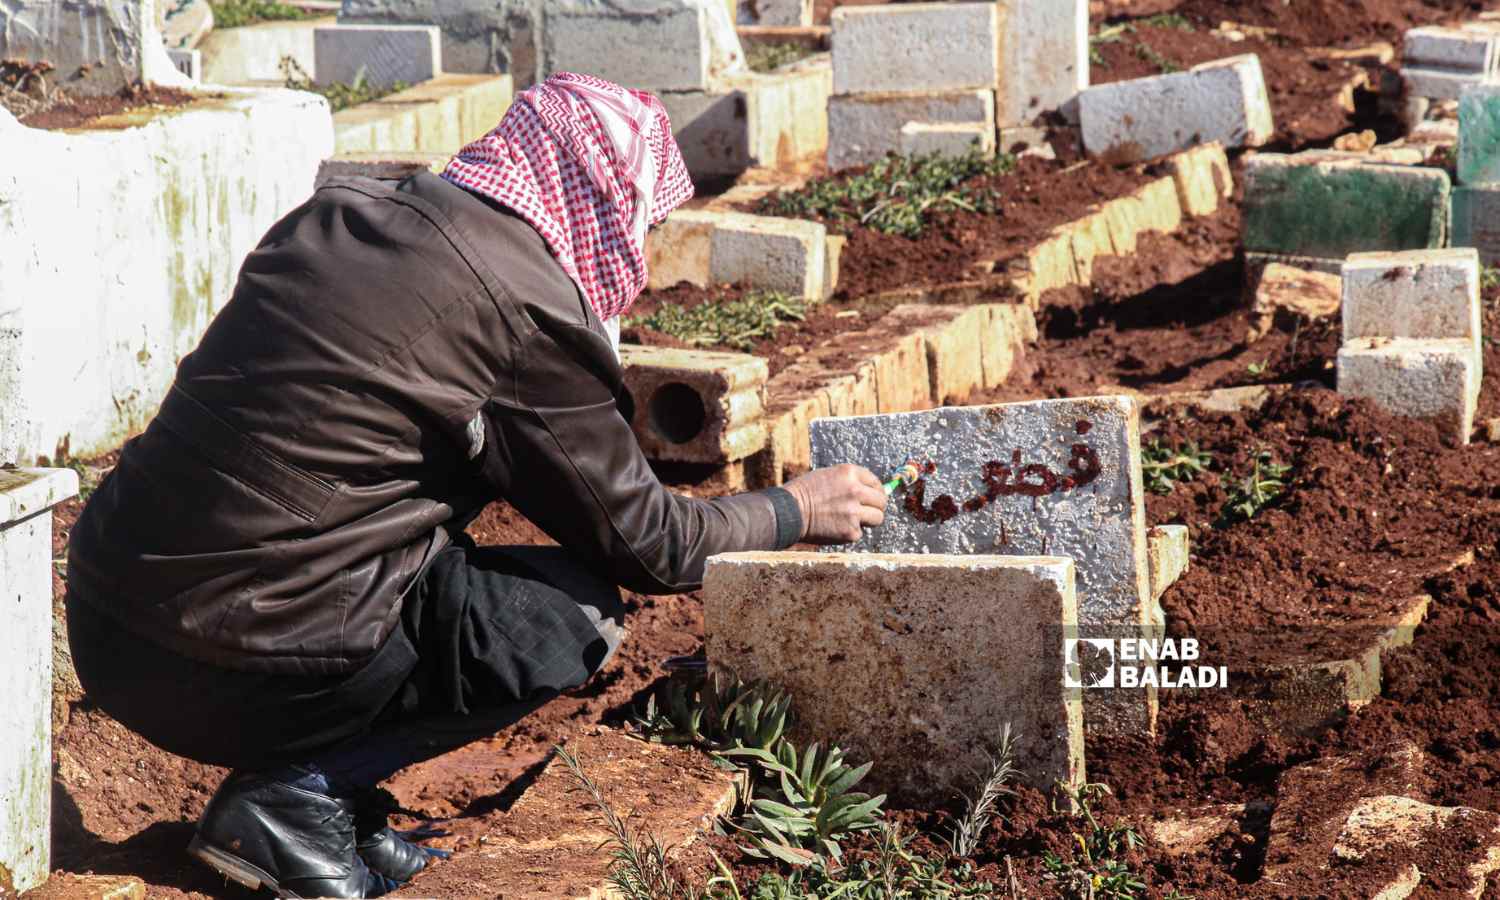 A man writes a name on the tombstone of one of the earthquake victims that struck the northwestern regions of Syria, in the town of Harbanoush in the countryside of Idlib - February 8, 2023 (Enab Baladi/Iyad Abdul Jawad)